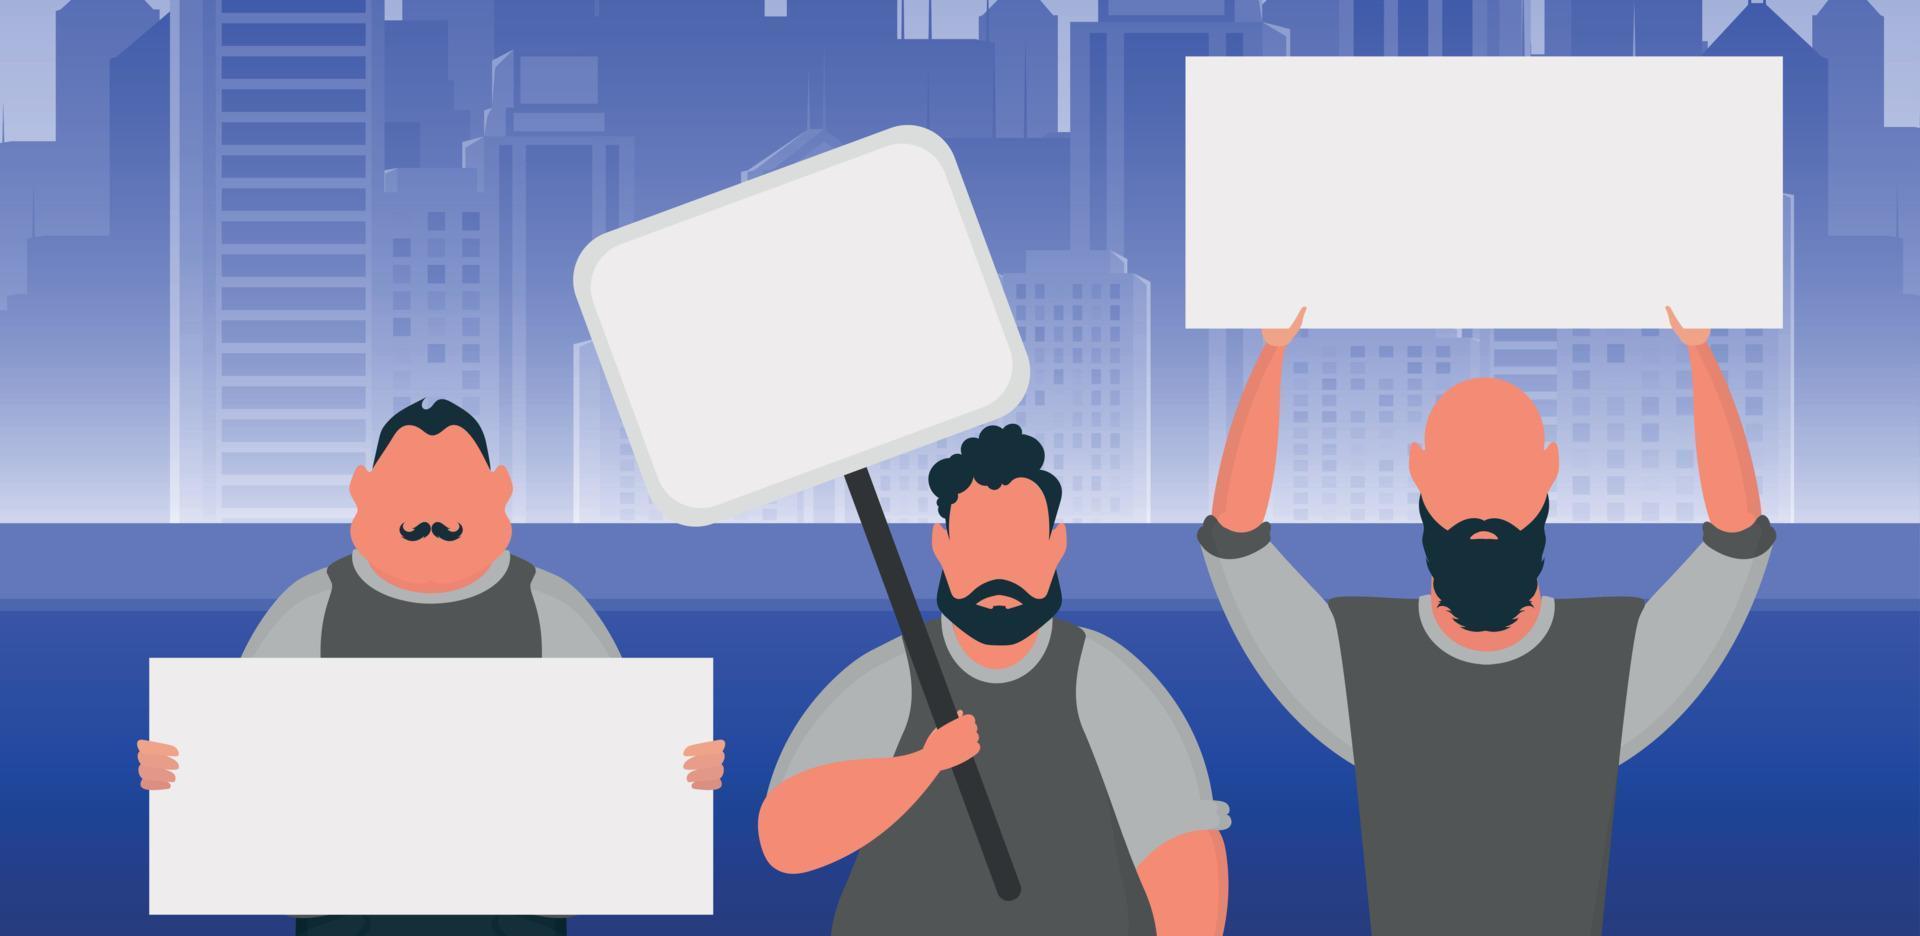 A crowd of guys with banners in their hands are protesting. Cartoon style. Vector illustration.